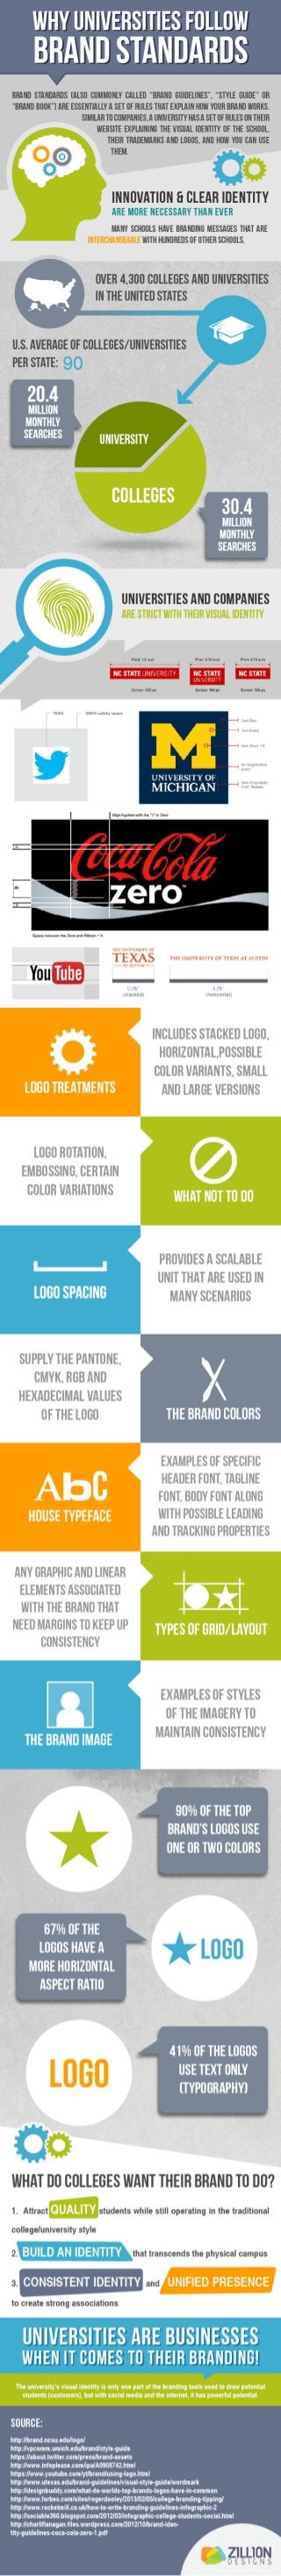 [INFOGRAPHIC]: Why Universities Follow Brand Standards